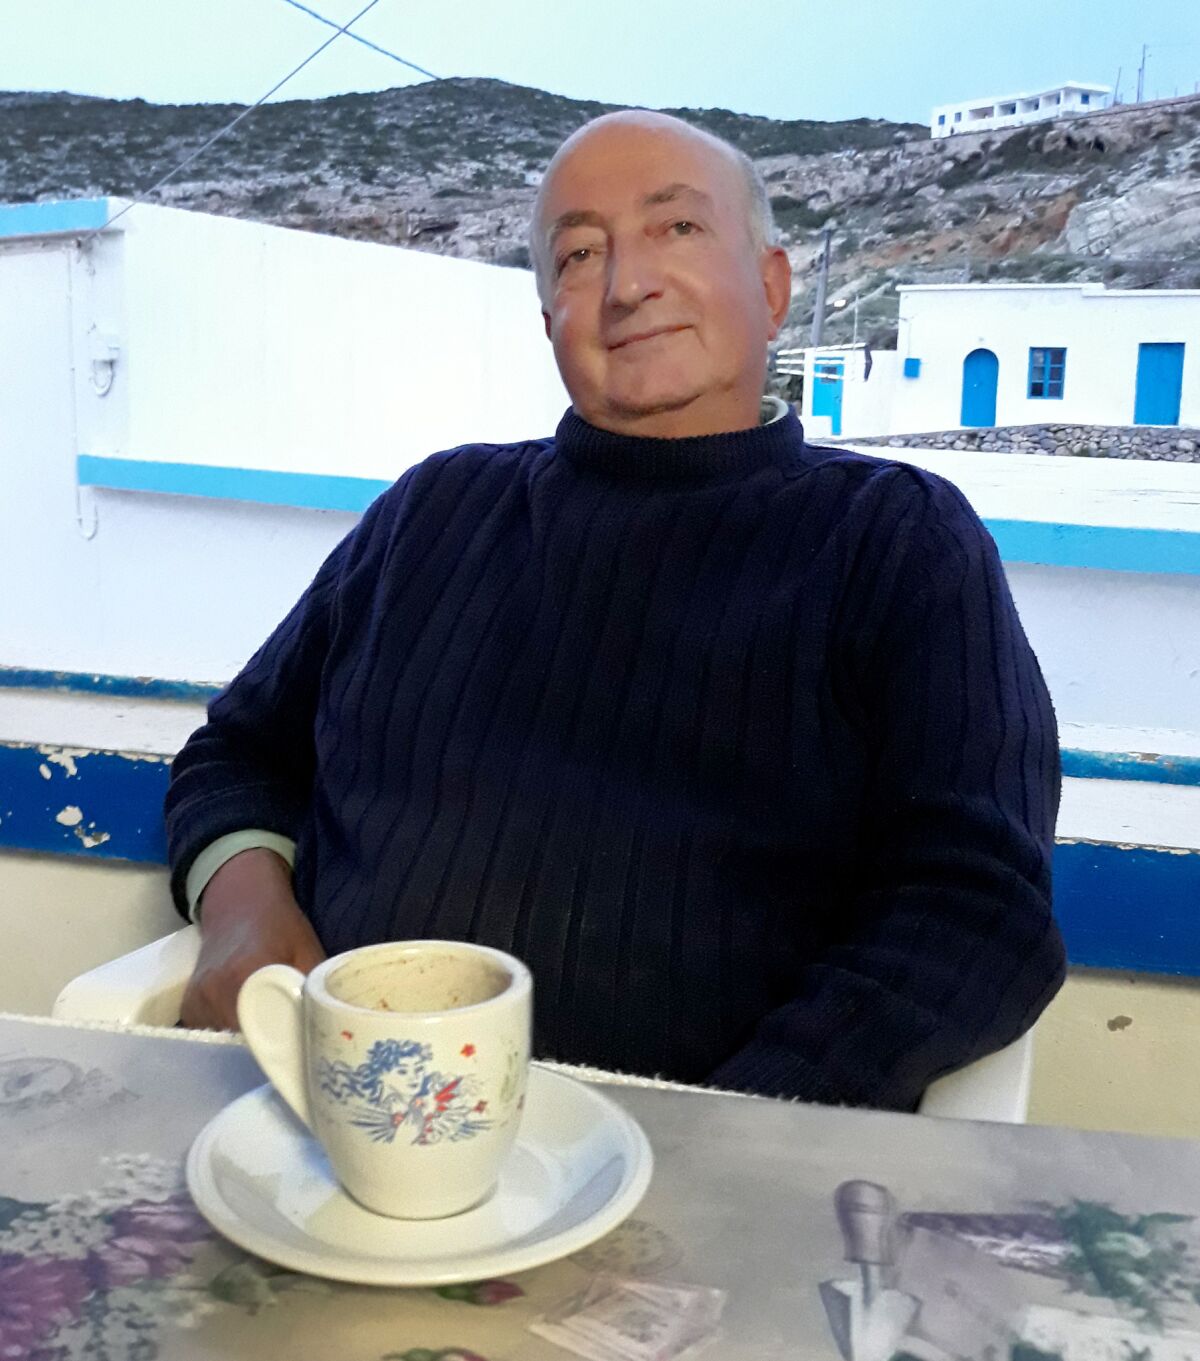 "We are an island of pensioners, old men, not children," says 62-year-old Vassilis Aloizos, a native of Antikythera who spends seven months of the year here.